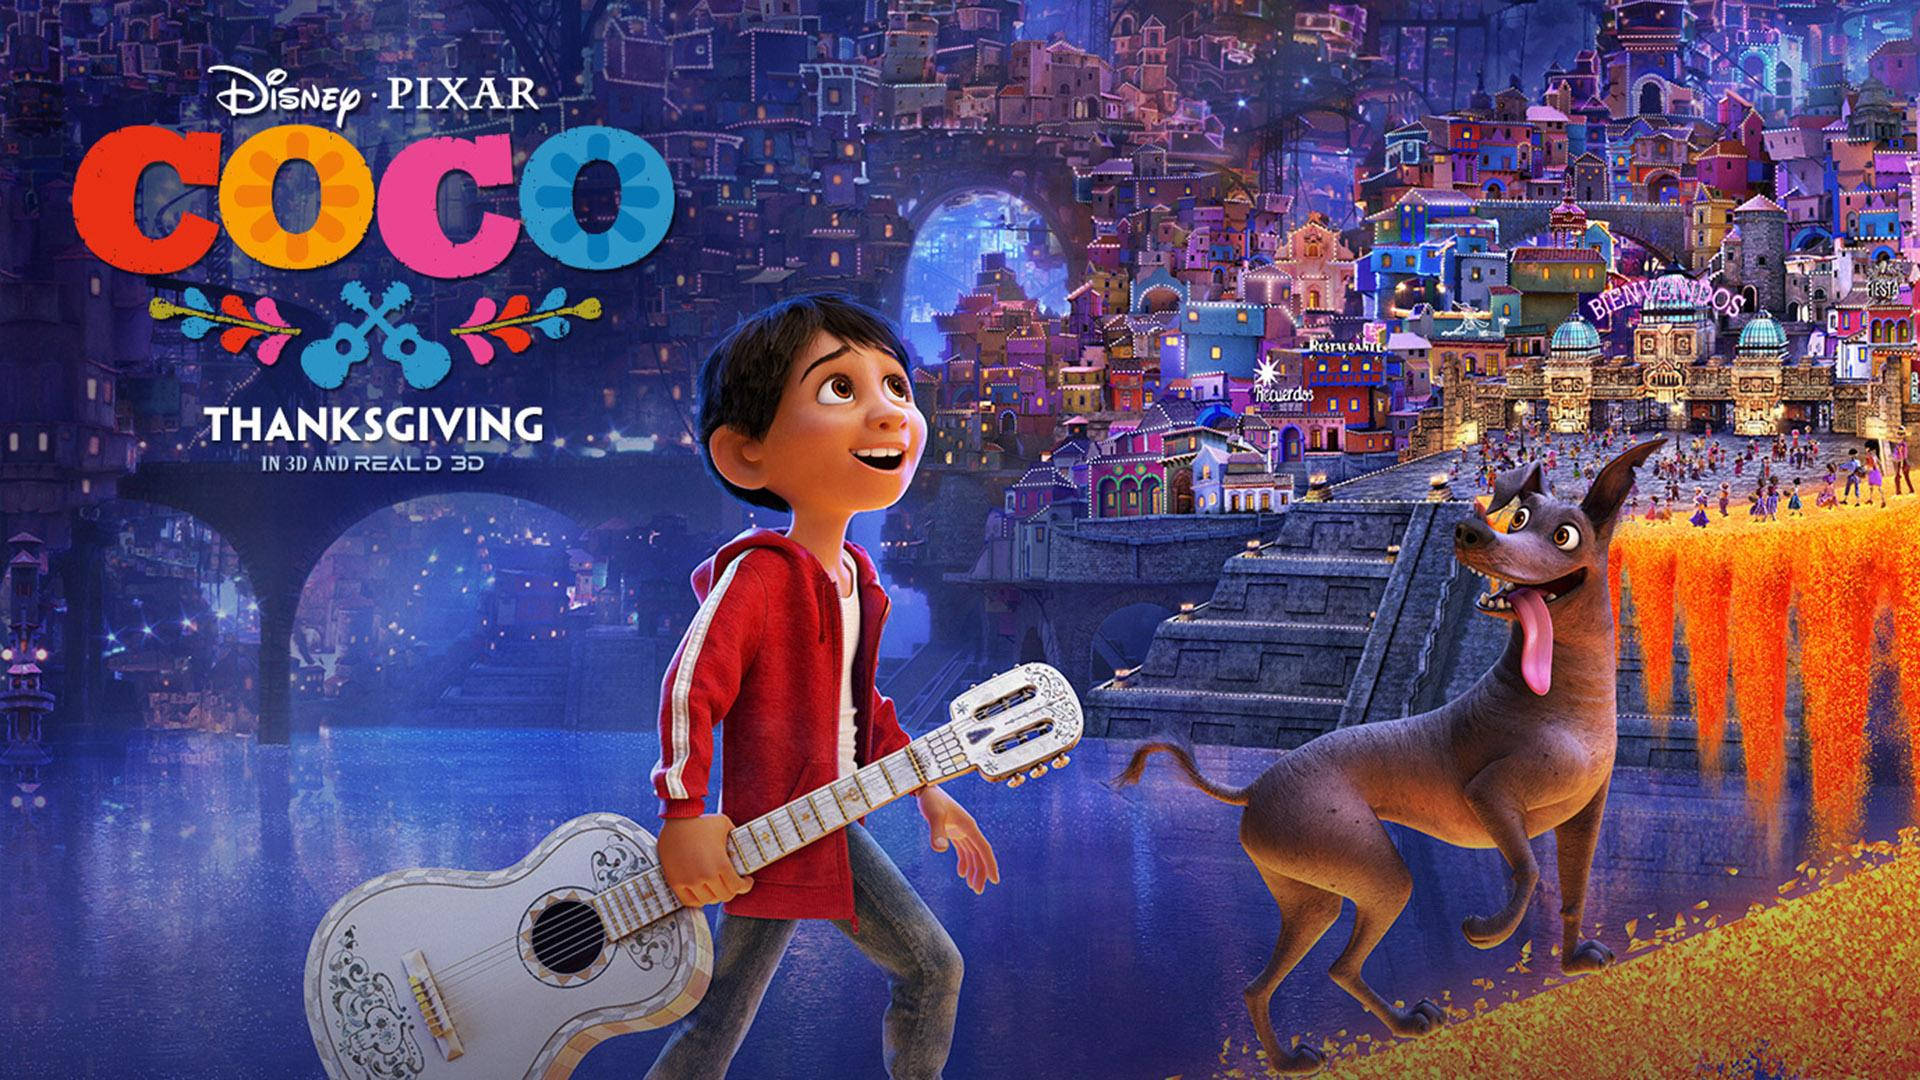 3d Coco Movie Poster